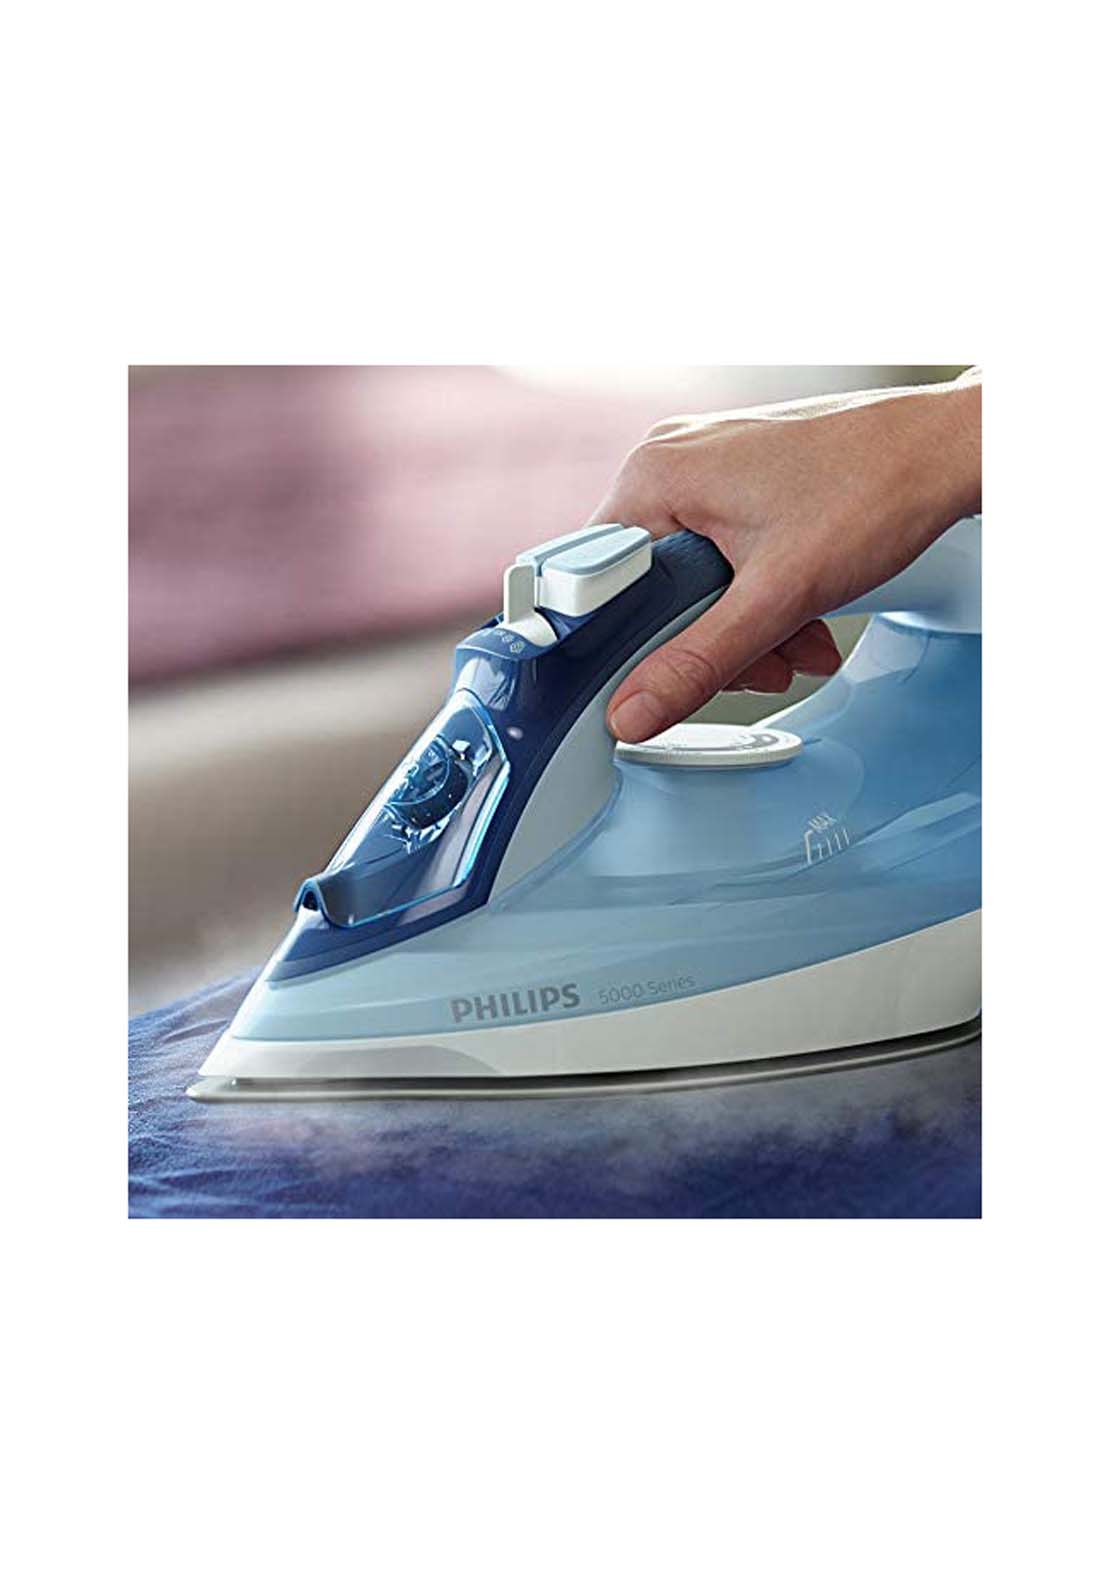 Philips Serie Steam Iron | Dst503026 5000 6 Shaws Department Stores